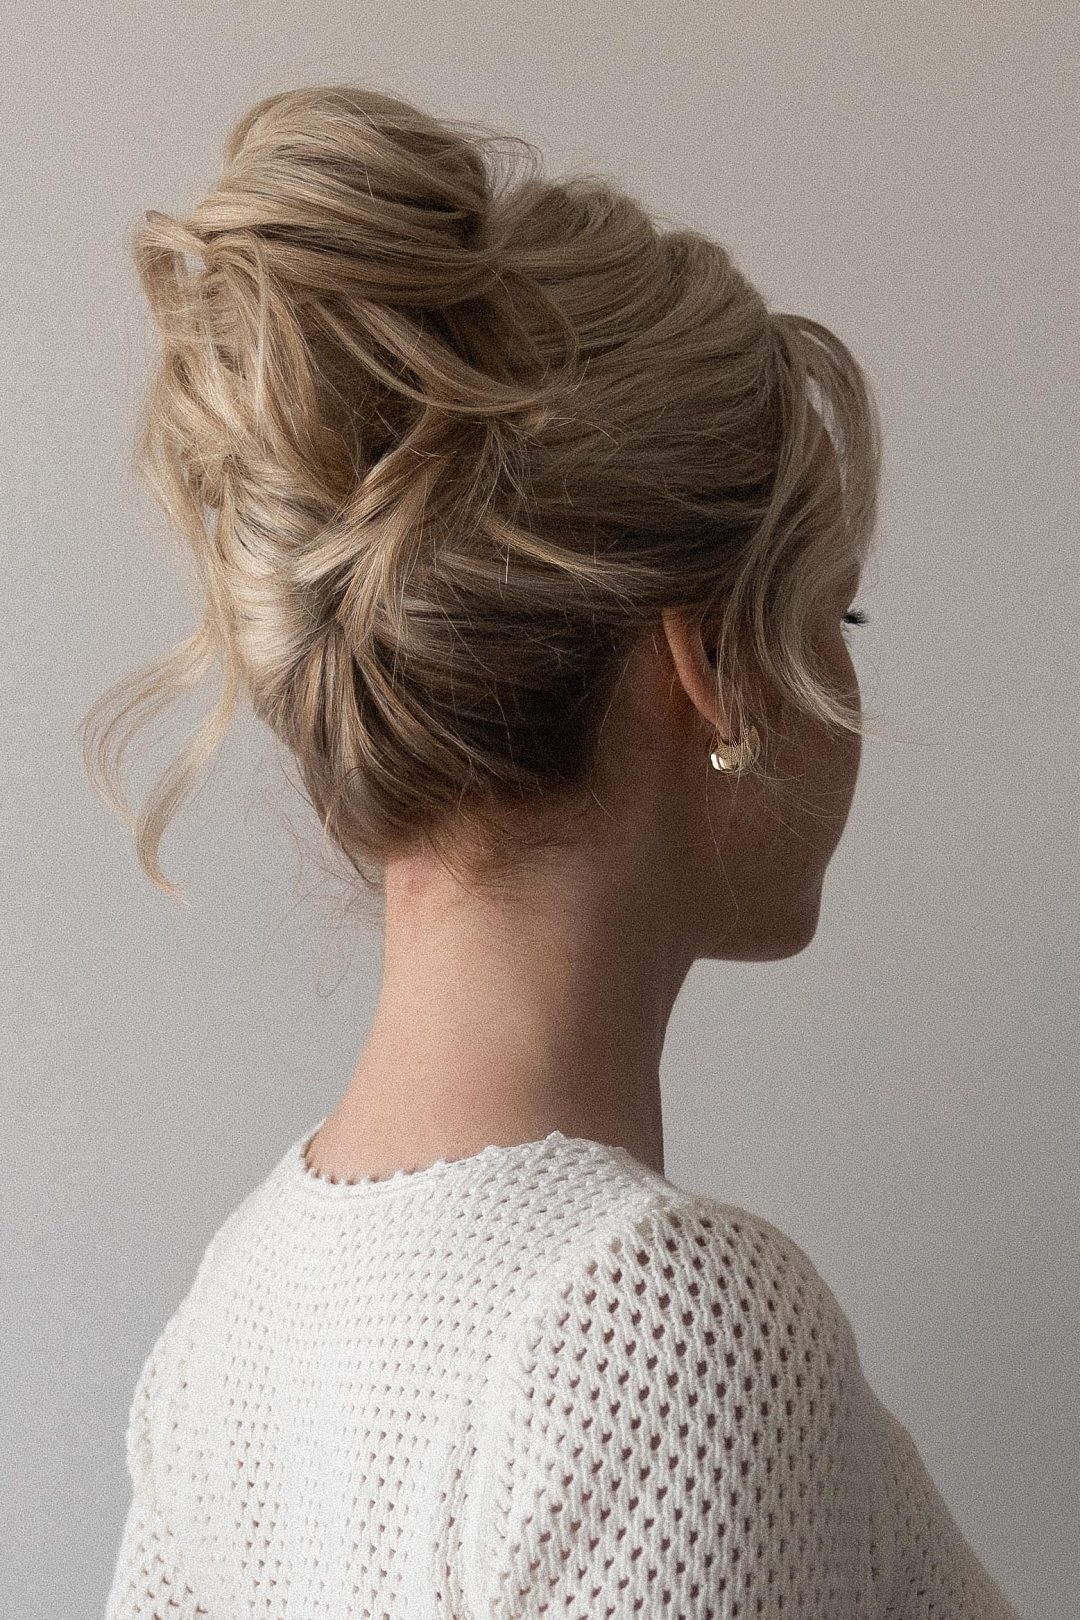 16 Simple Hairstyles for Work That Will Make You Look Professional -  College Fashion